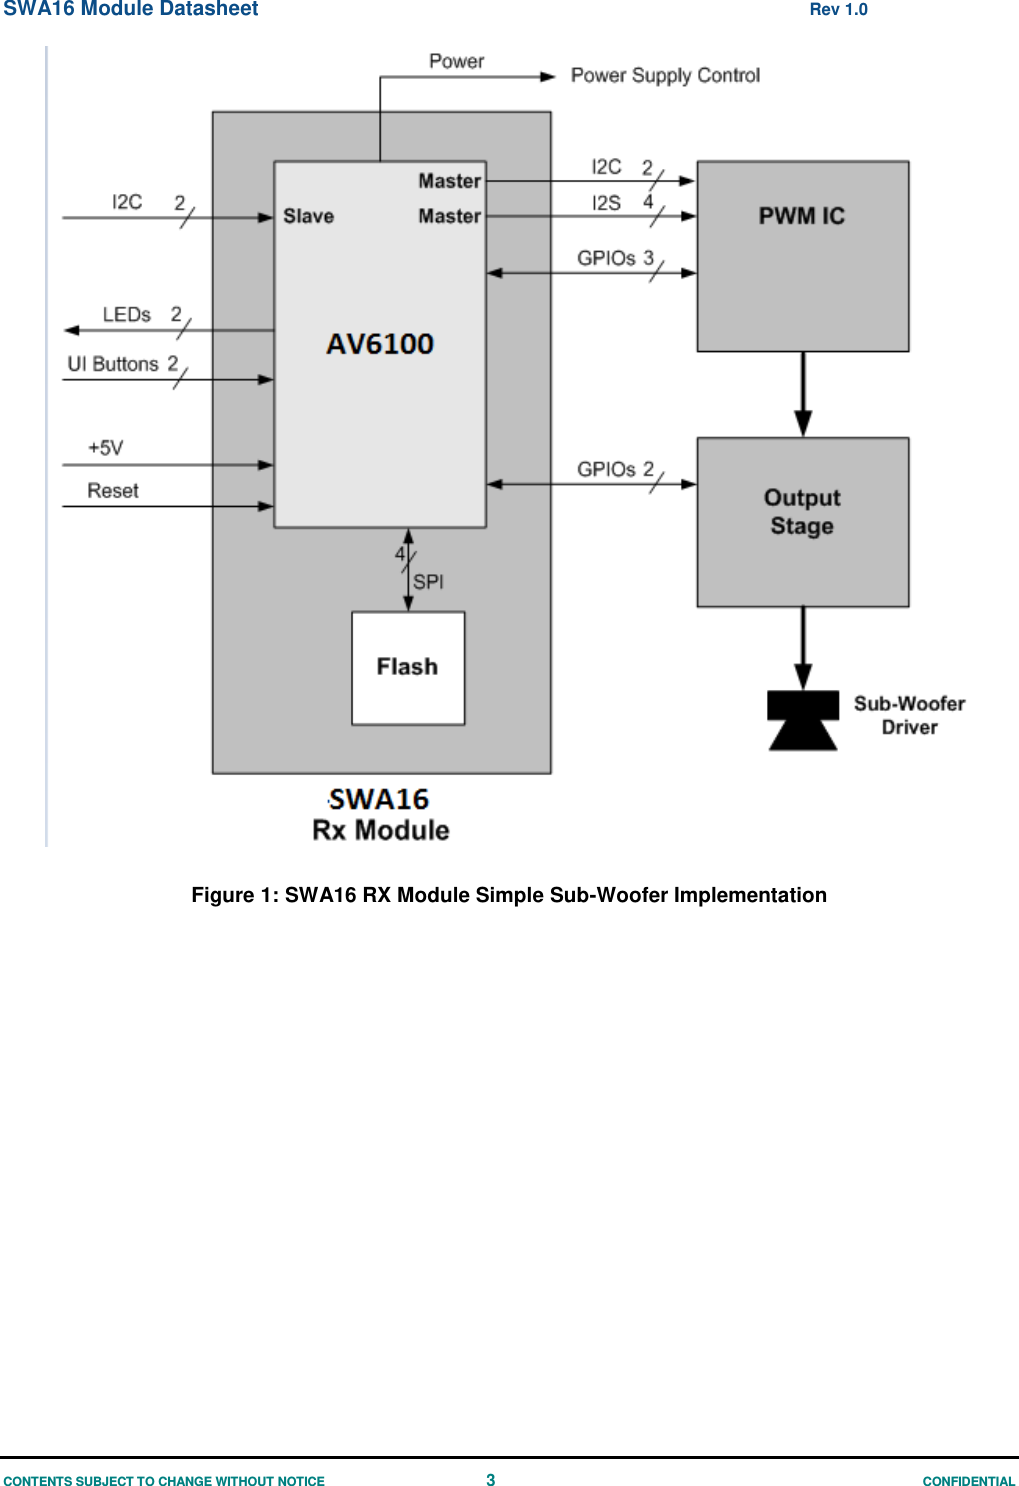 SWA16 Module Datasheet  Rev 1.0 CONTENTS SUBJECT TO CHANGE WITHOUT NOTICE  3 CONFIDENTIAL Figure 1: SWA16 RX Module Simple Sub-Woofer Implementation 